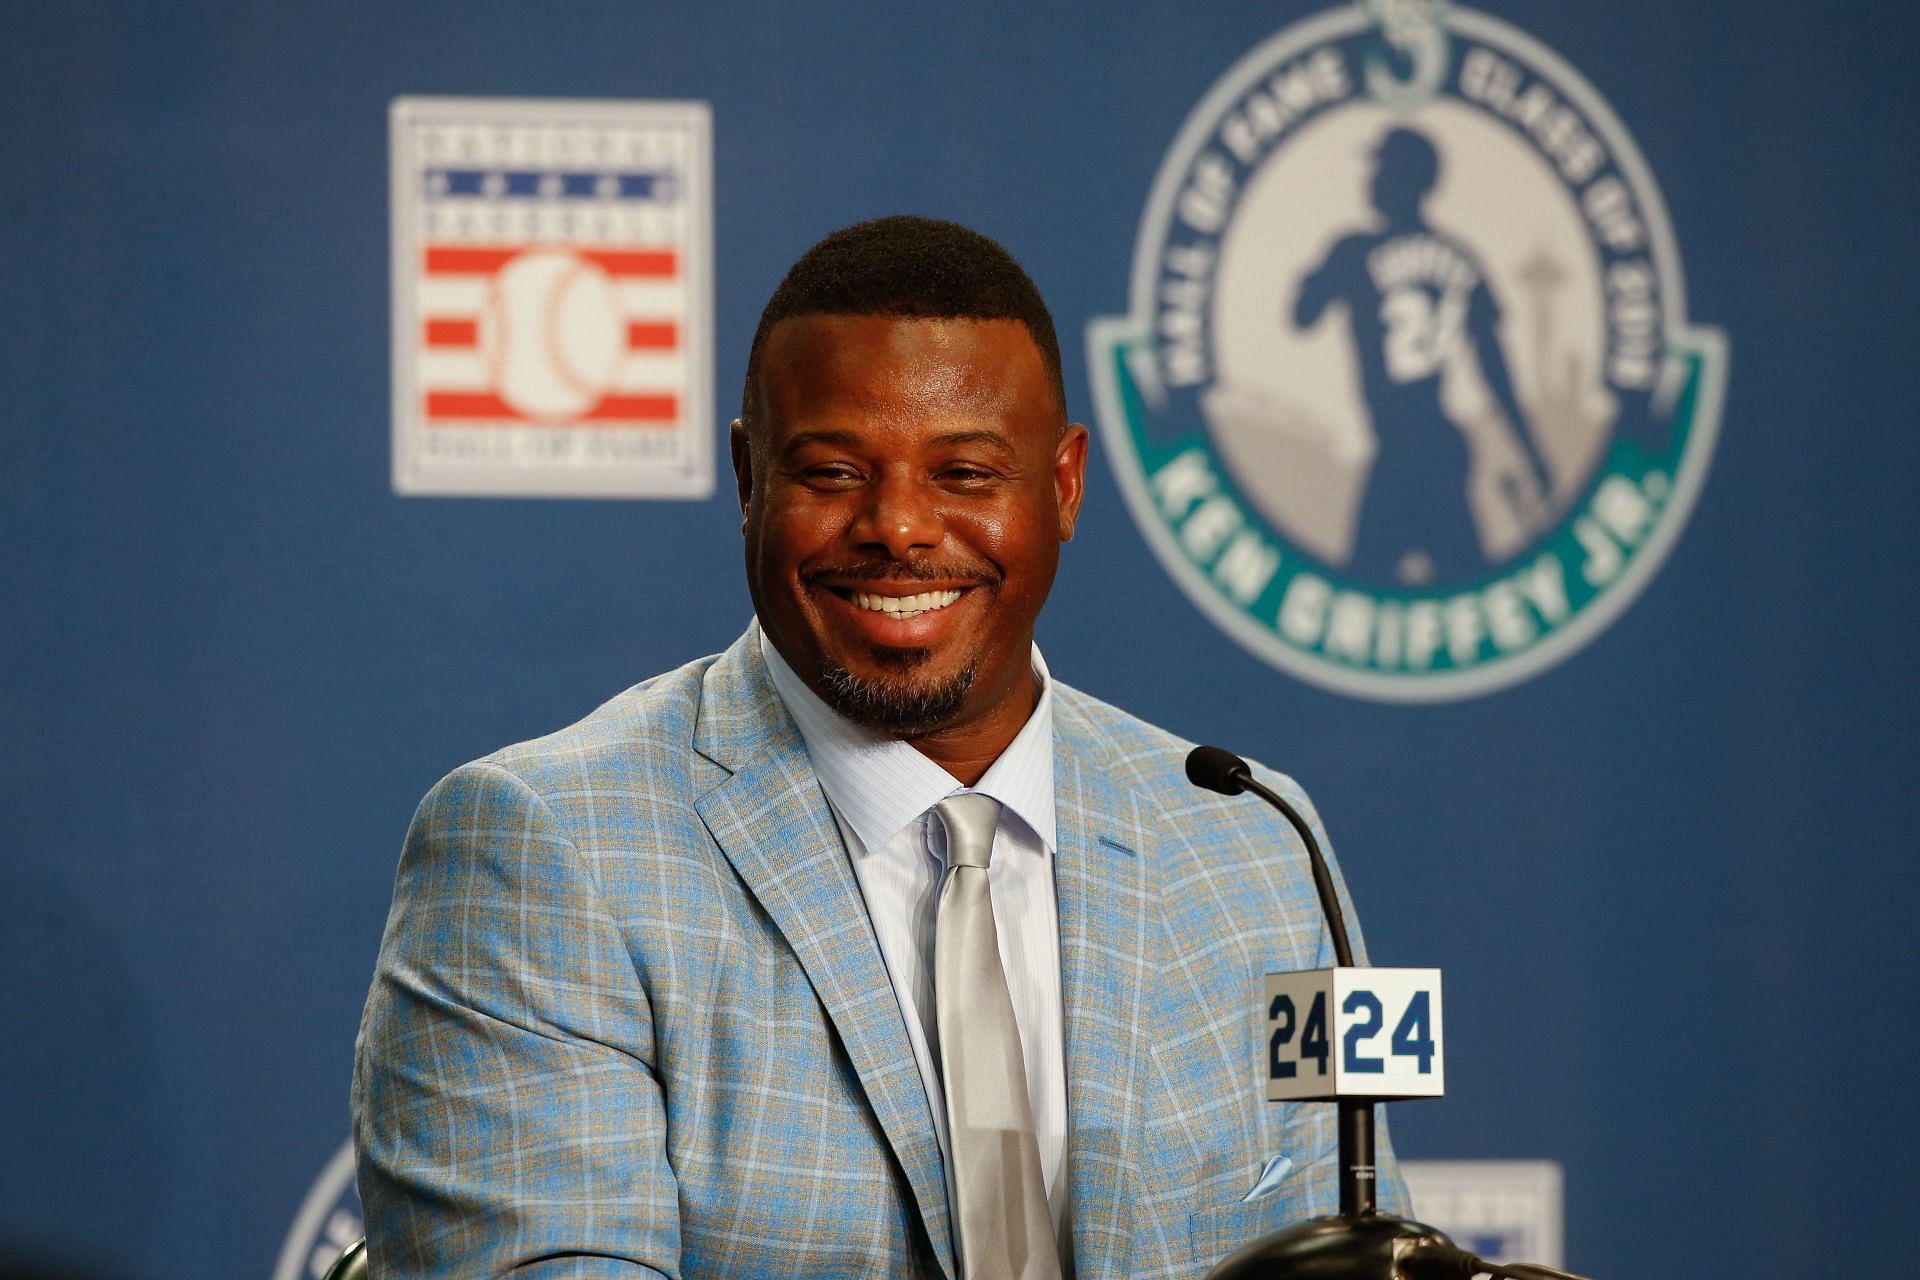 Ken Griffey Jr. is heading up Swingman Classic Baseball Hall of Fame Induction Ceremony